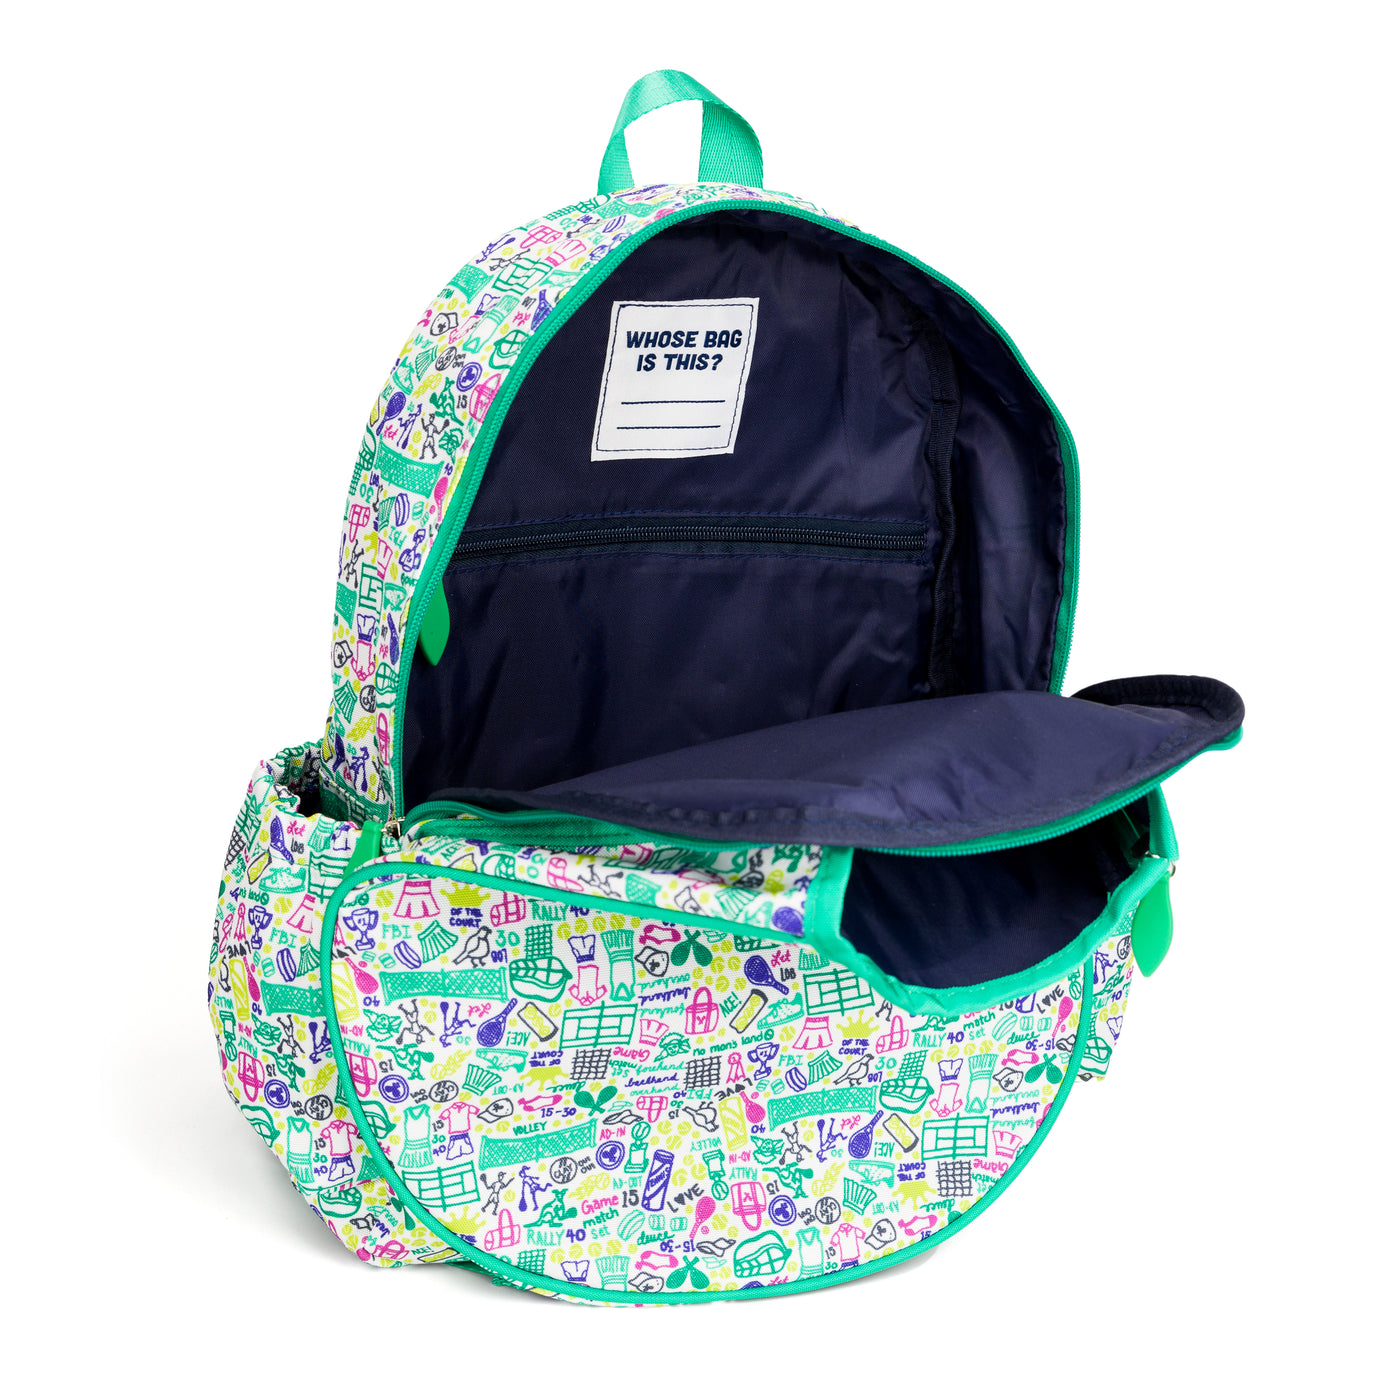 inside view of joy street collab kids tennis backpack. Bag has drawings of tennis balls racquets and nets in green yellow and purple on the bag